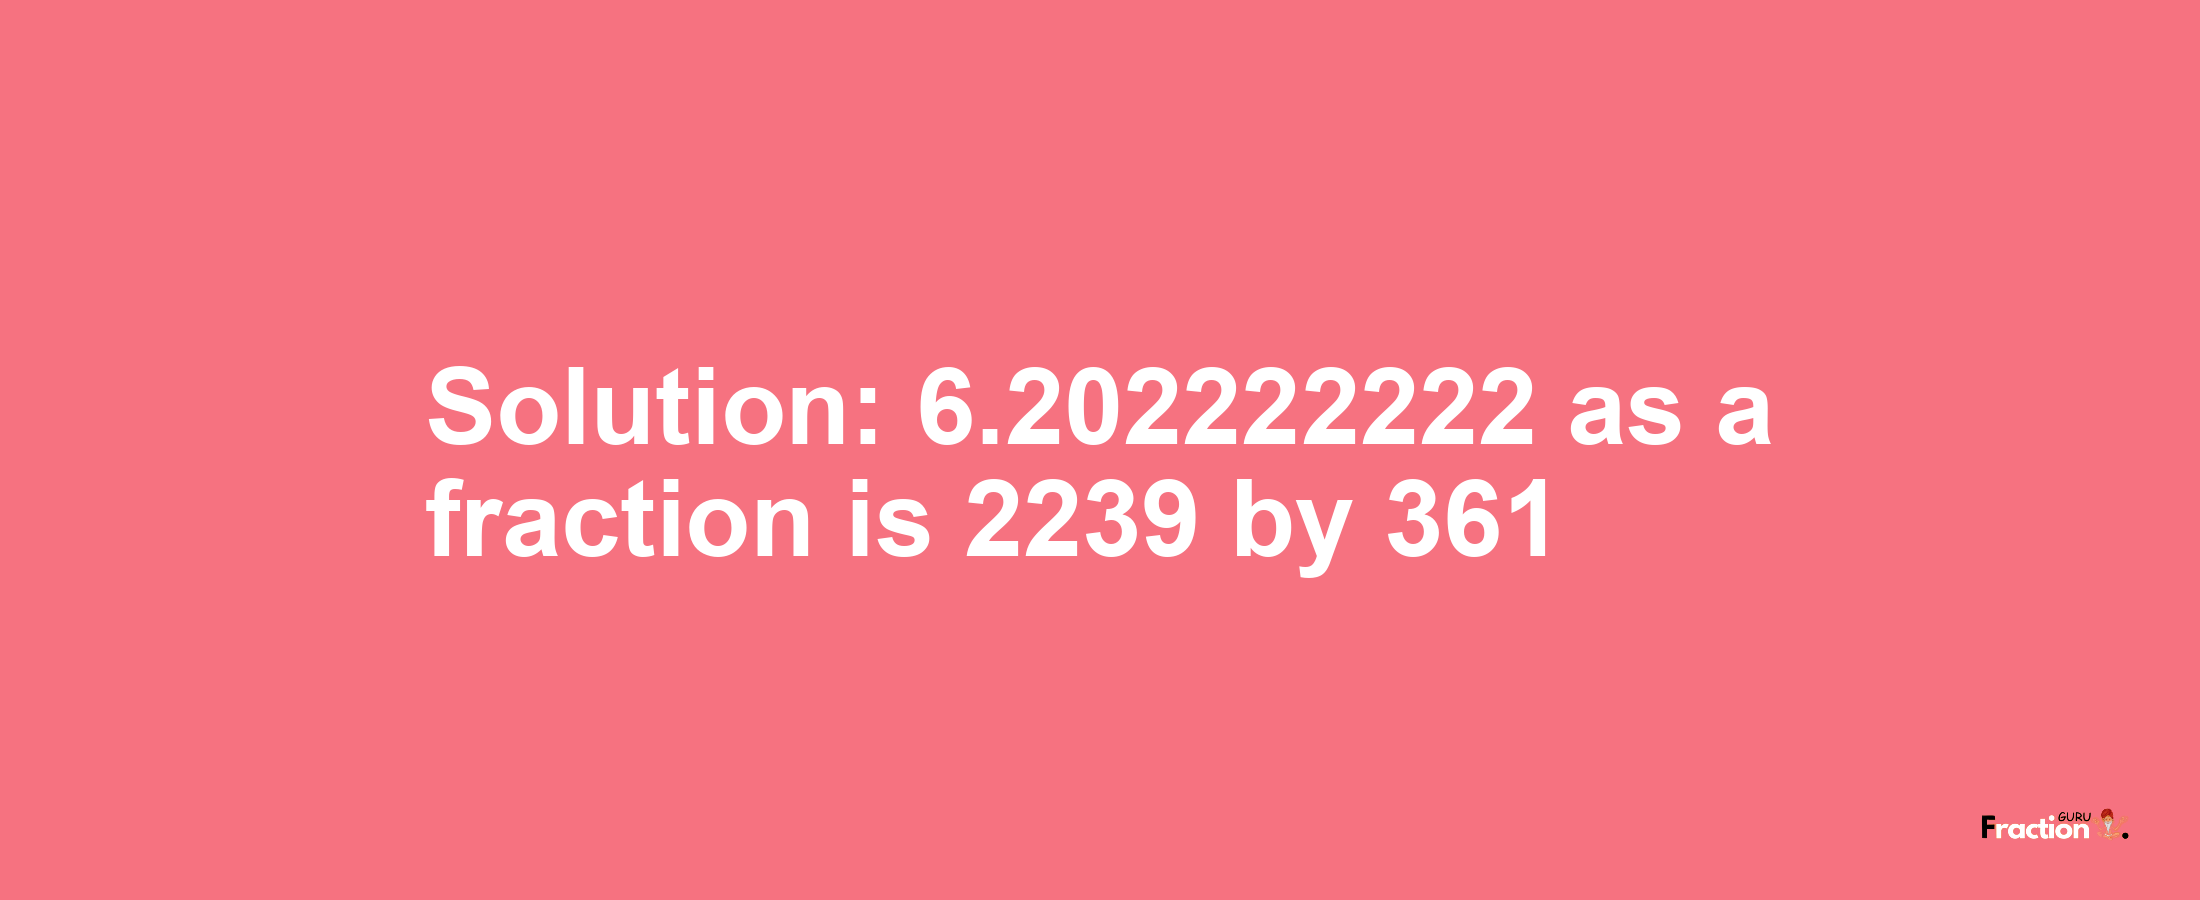 Solution:6.202222222 as a fraction is 2239/361